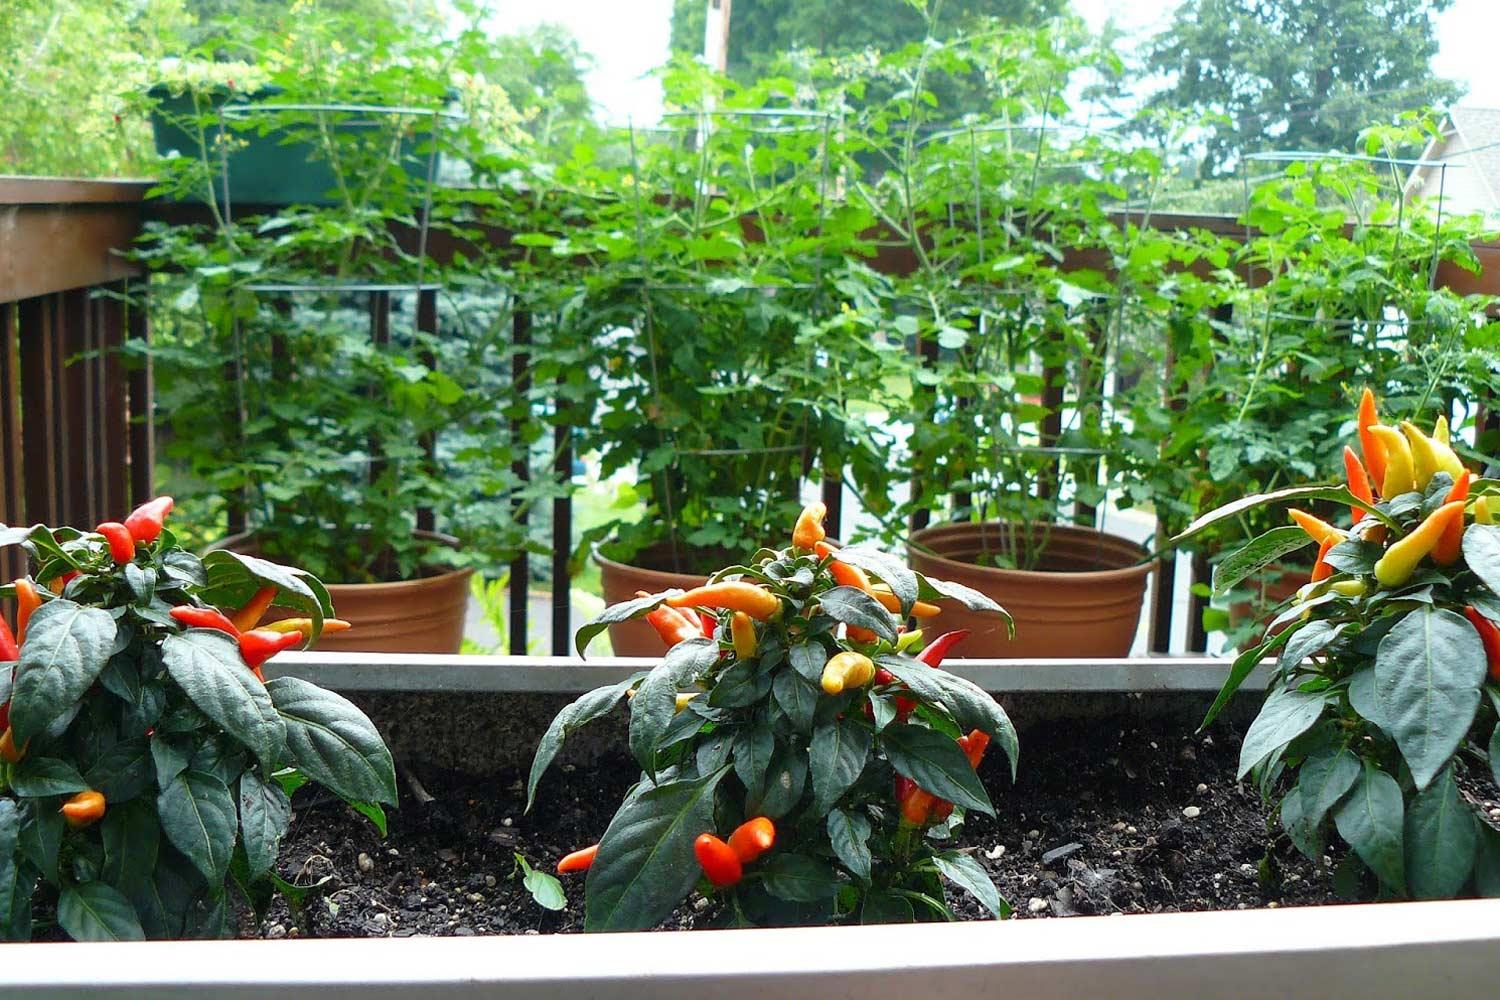 Hot pepper plants and tomatoes planted in containers on an outdoor deck.